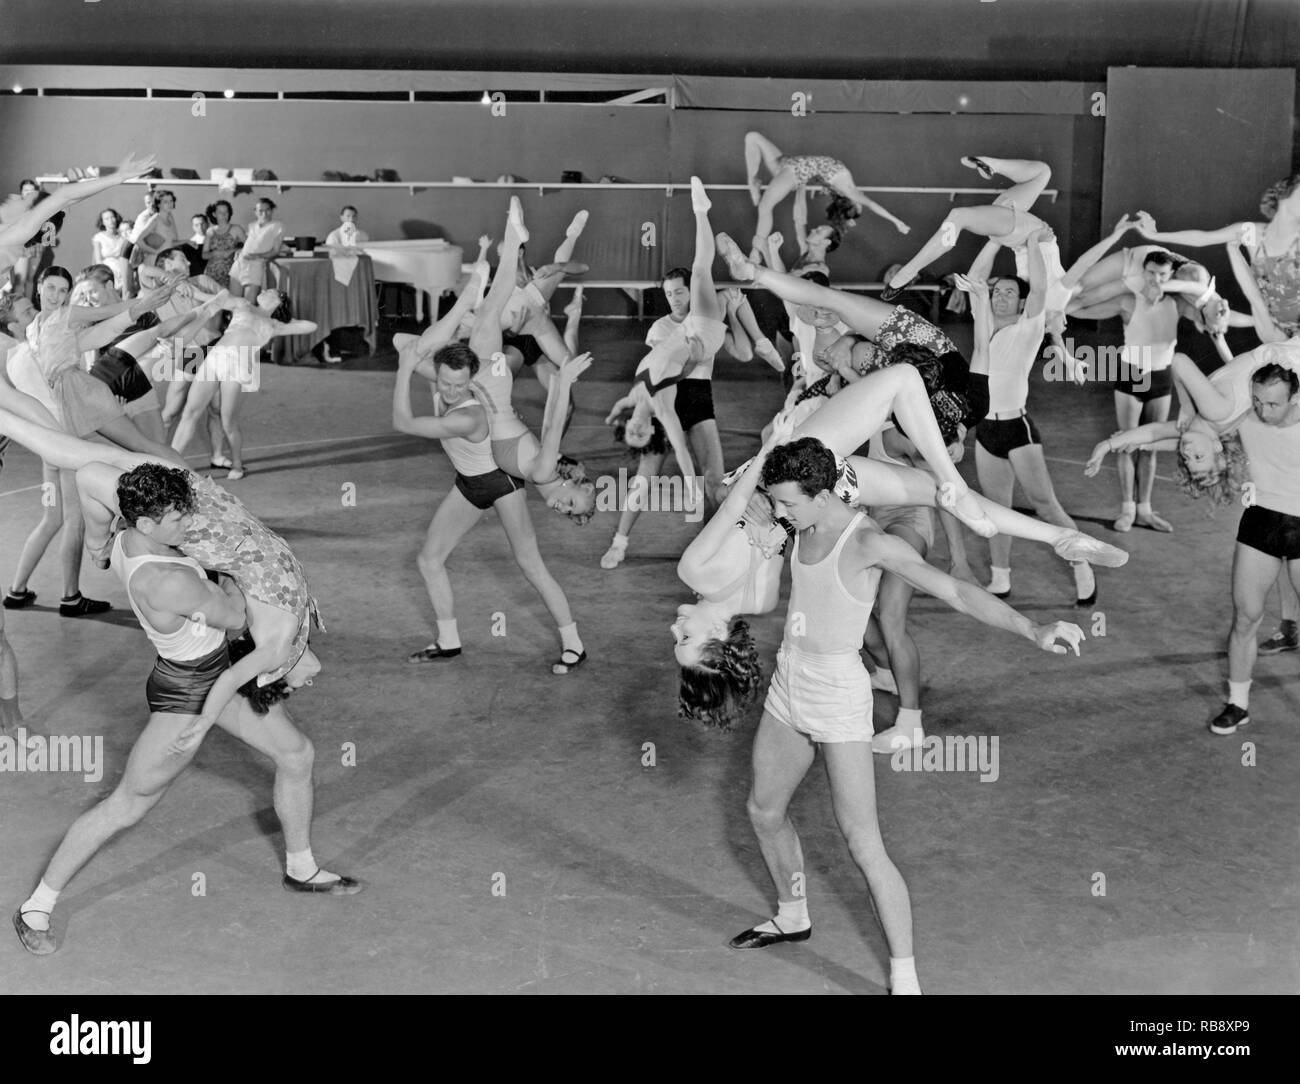 Dancers in the 1930s. A group of well-trained dancers are rehersing for a new Metro-Goldwyn-Mayer film. They are part of a choreography by Albertina Rasch. Stock Photo